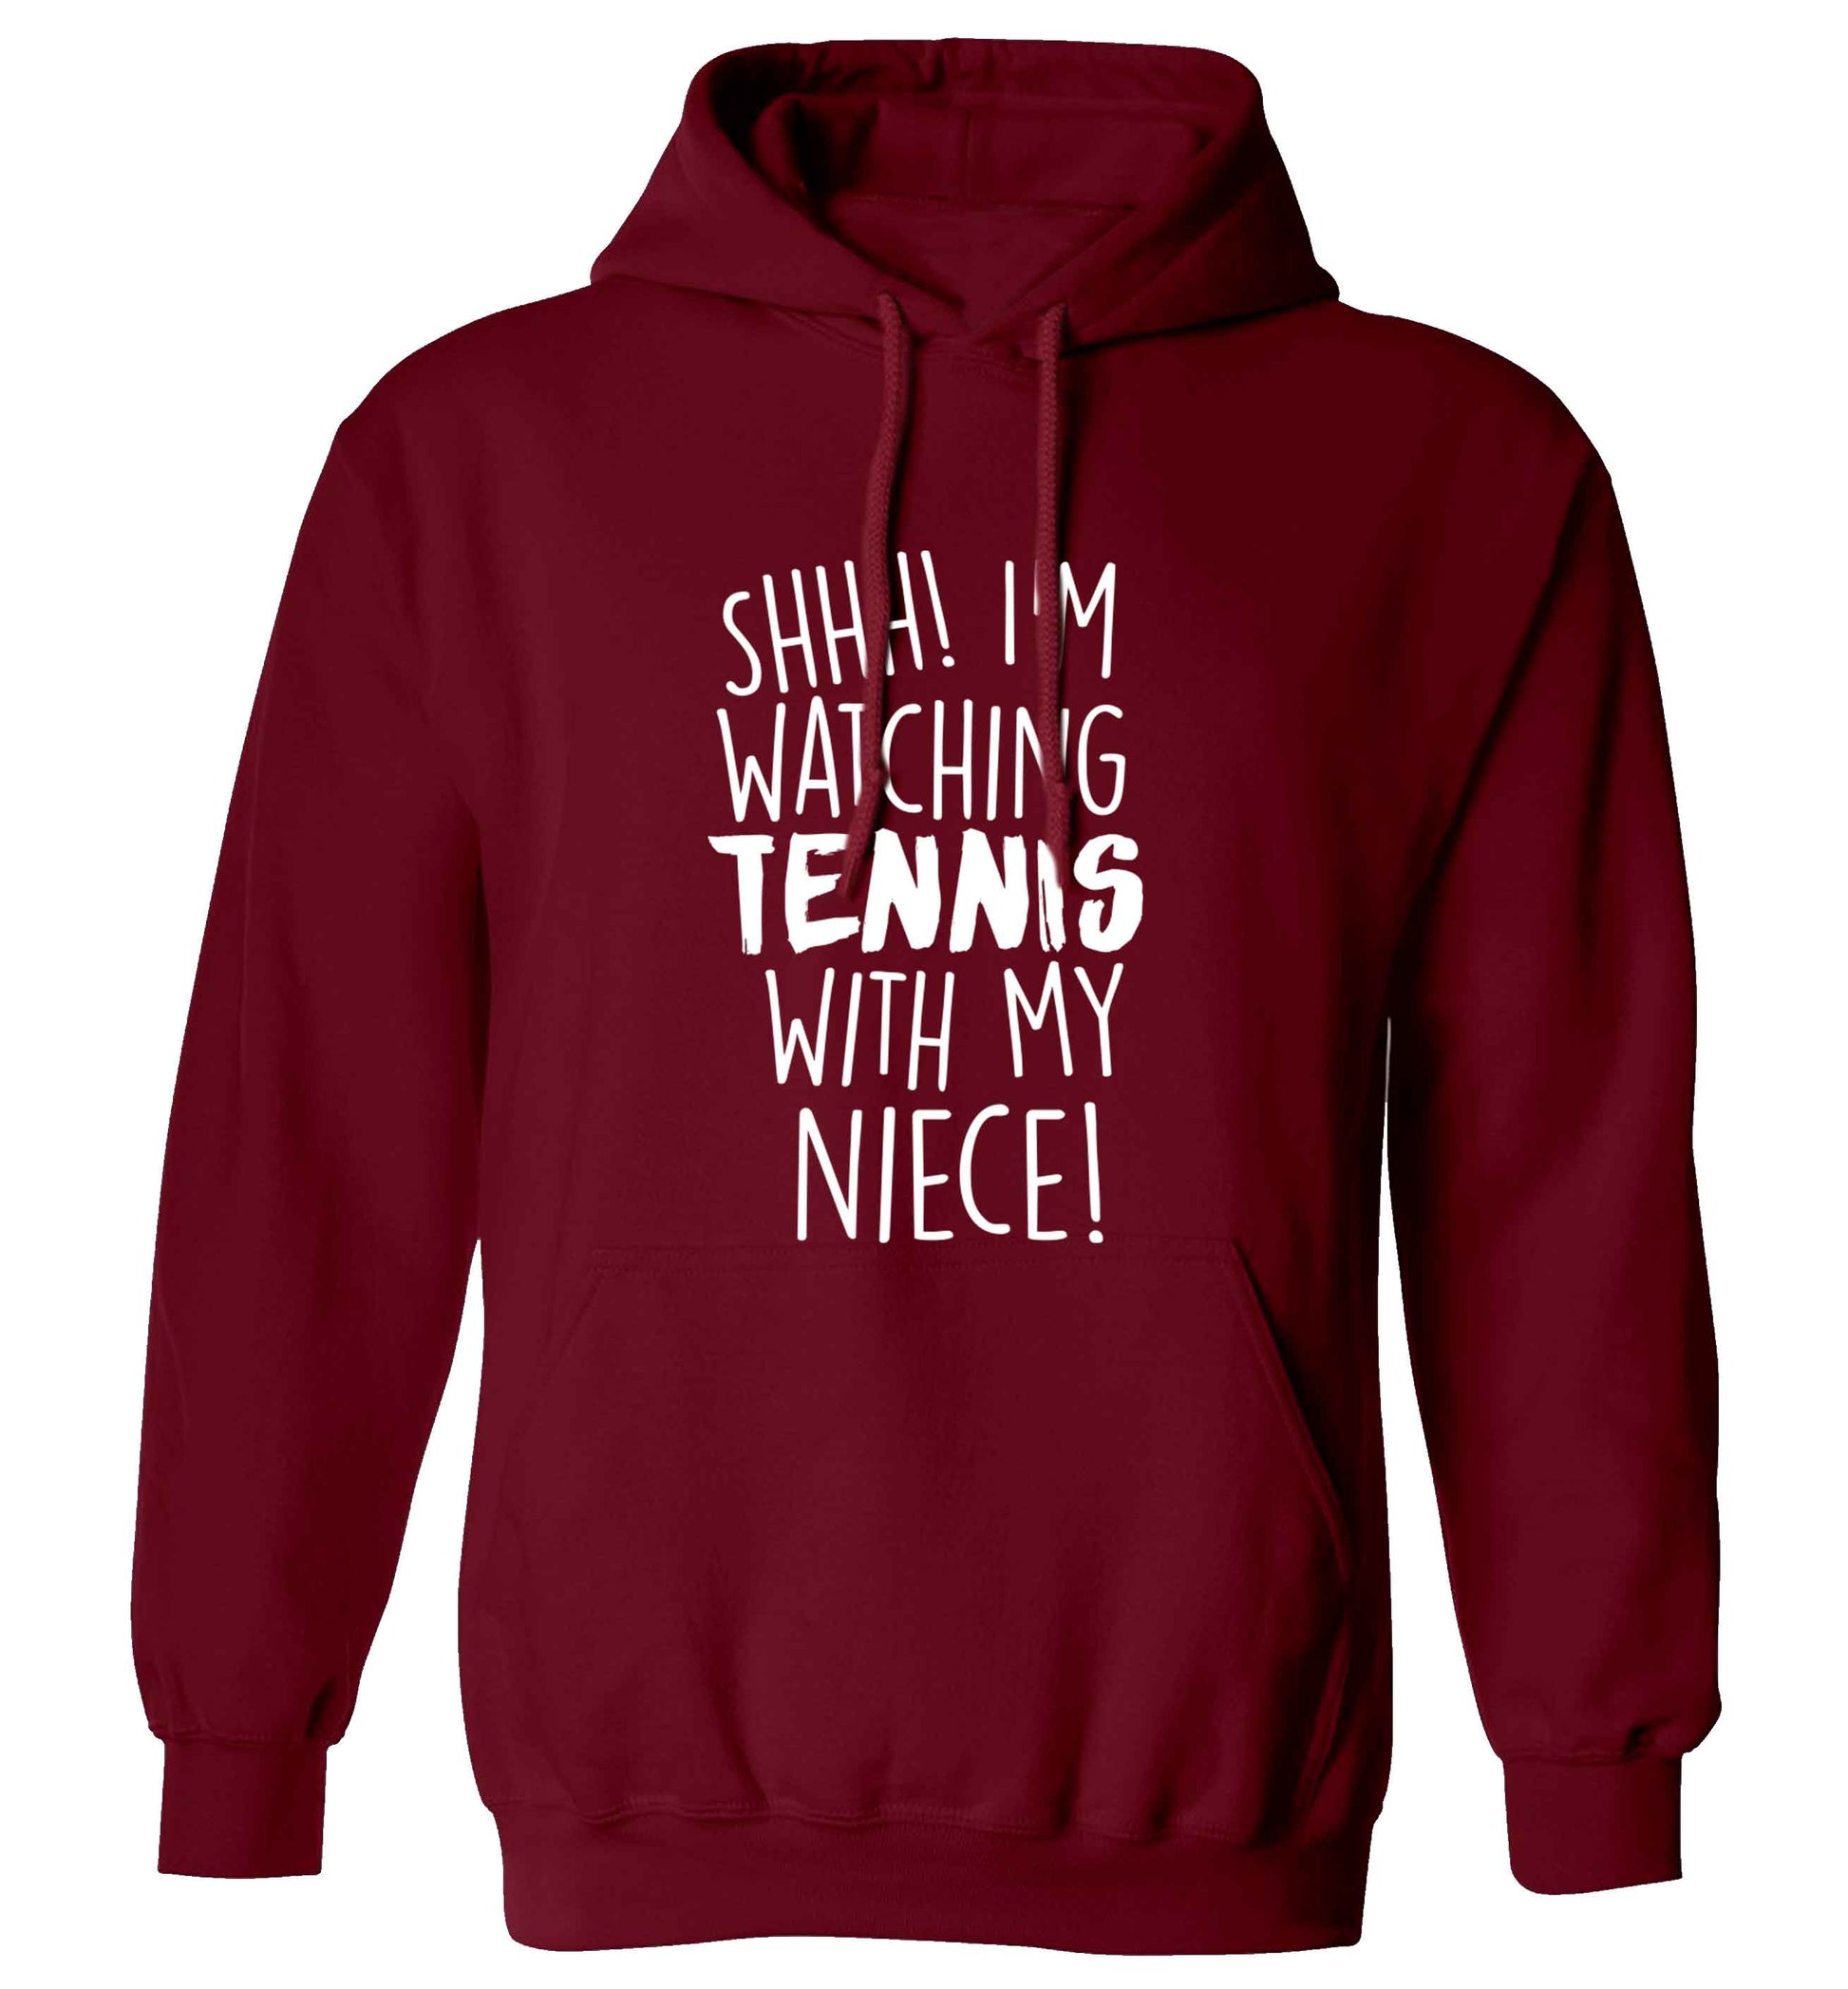 Shh! I'm watching tennis with my niece! adults unisex maroon hoodie 2XL